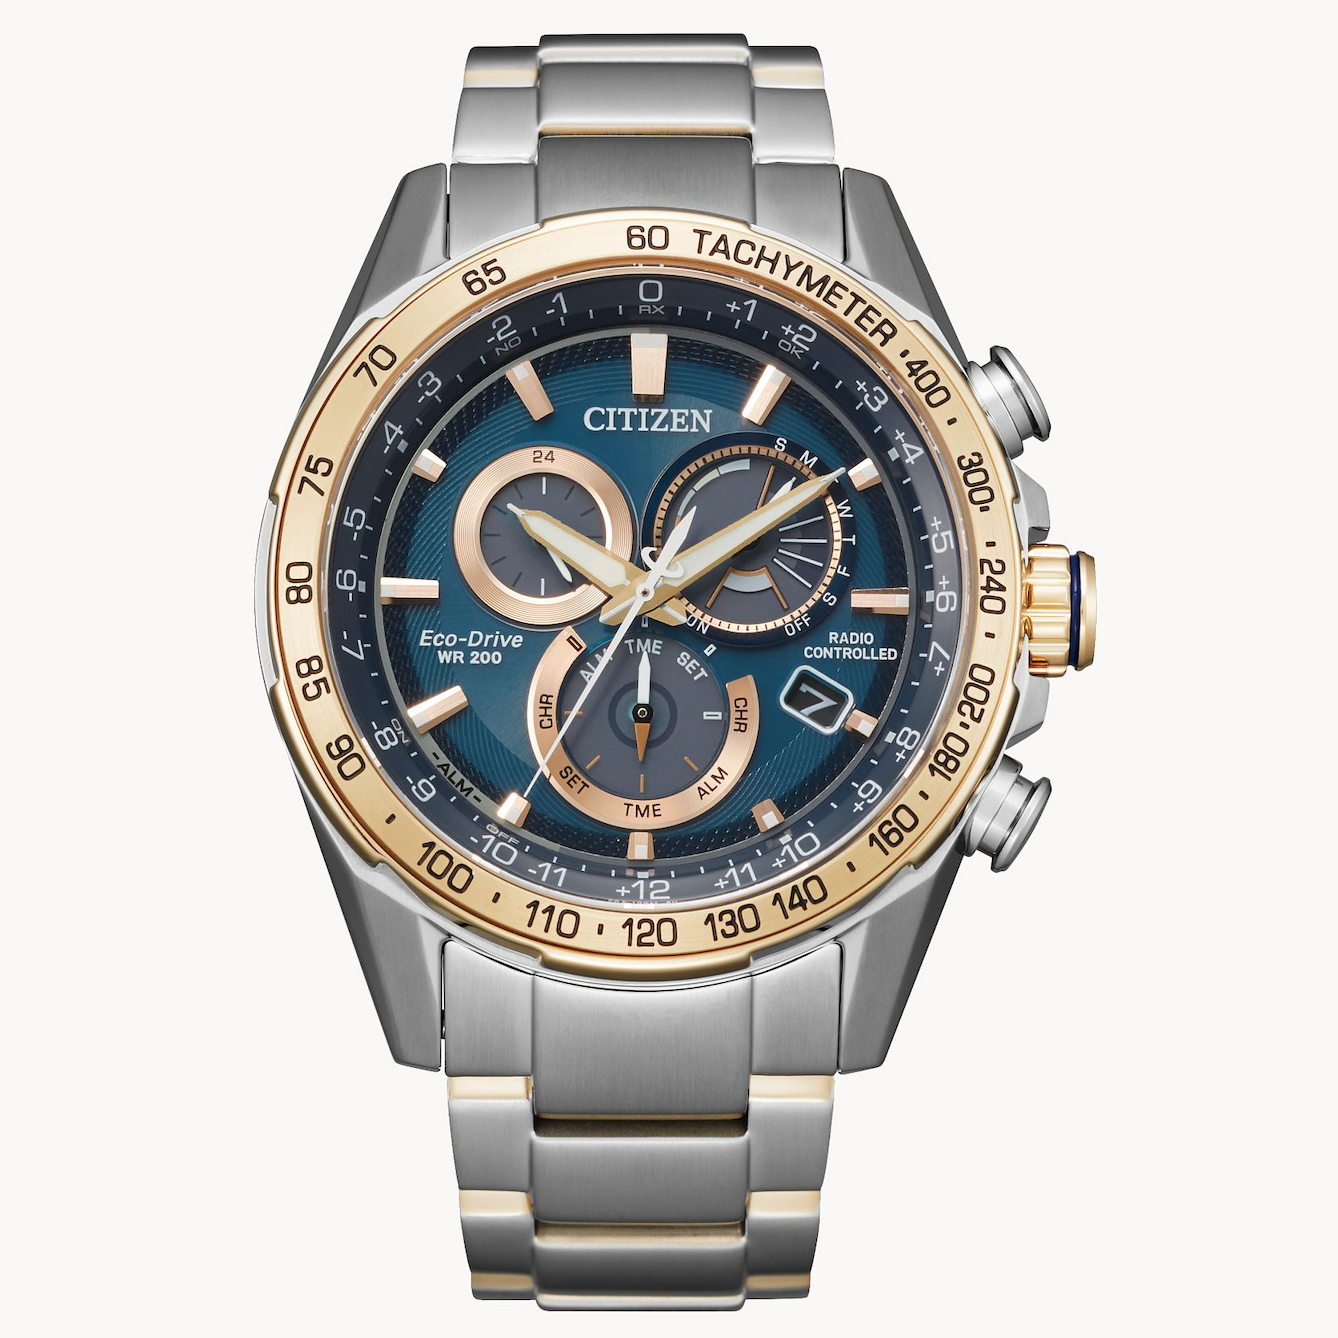 The Best Watches to Gift Men That Won't Disappoint — Shop Stylish